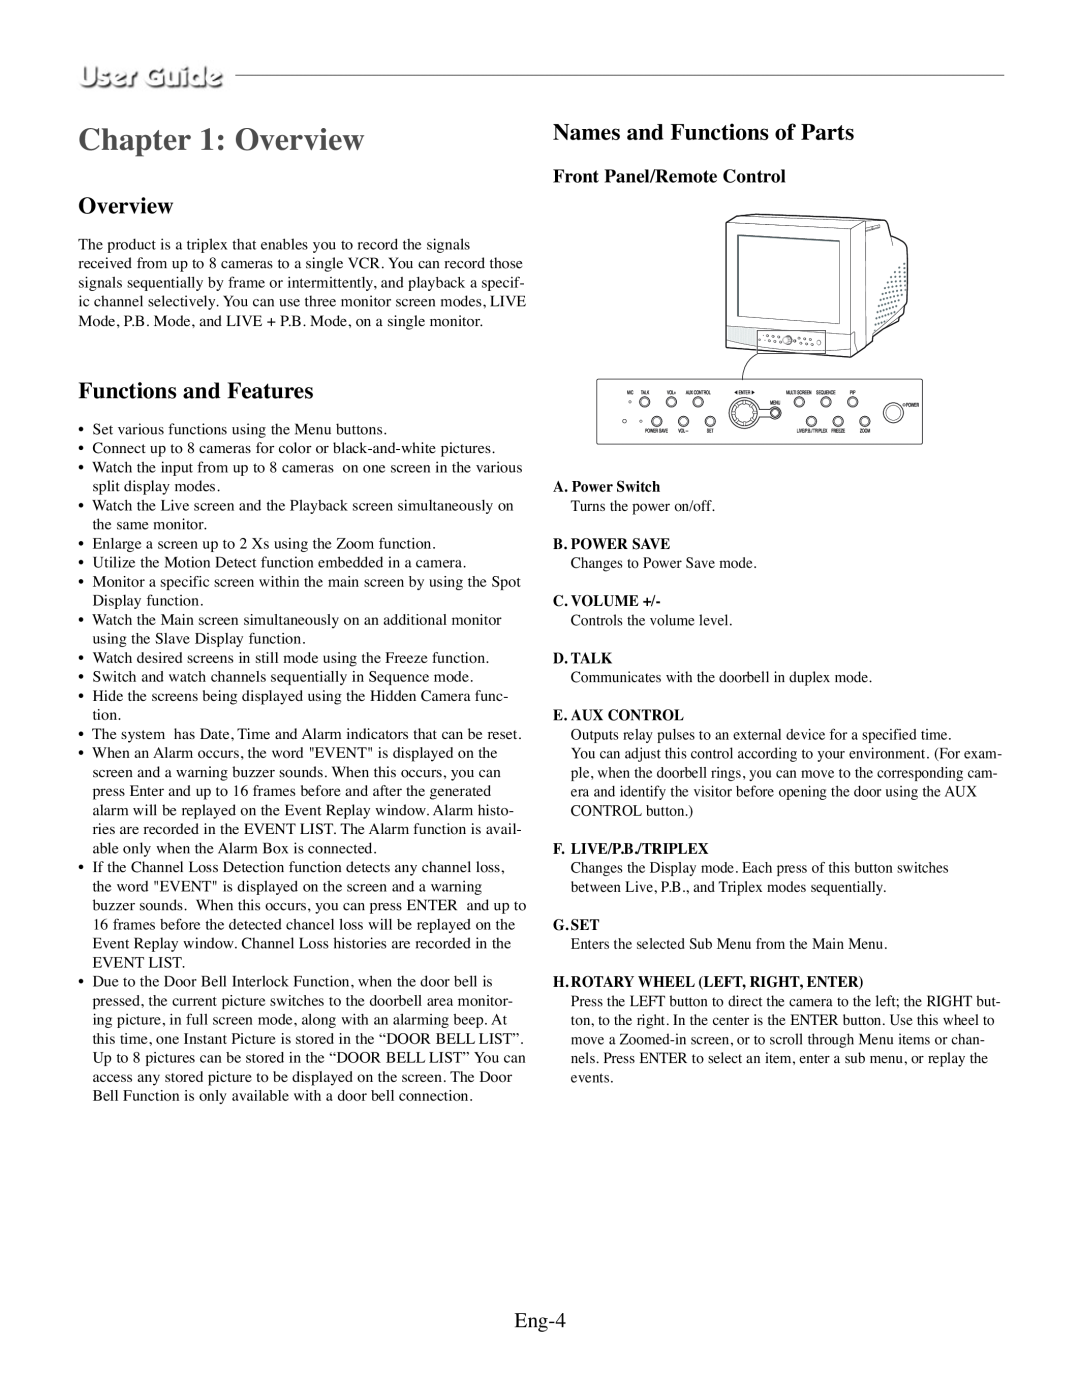 Samsung SMO-210TRP manual Overview, Names and Functions of Parts, Functions and Features, Eng-4, Front Panel/Remote Control 